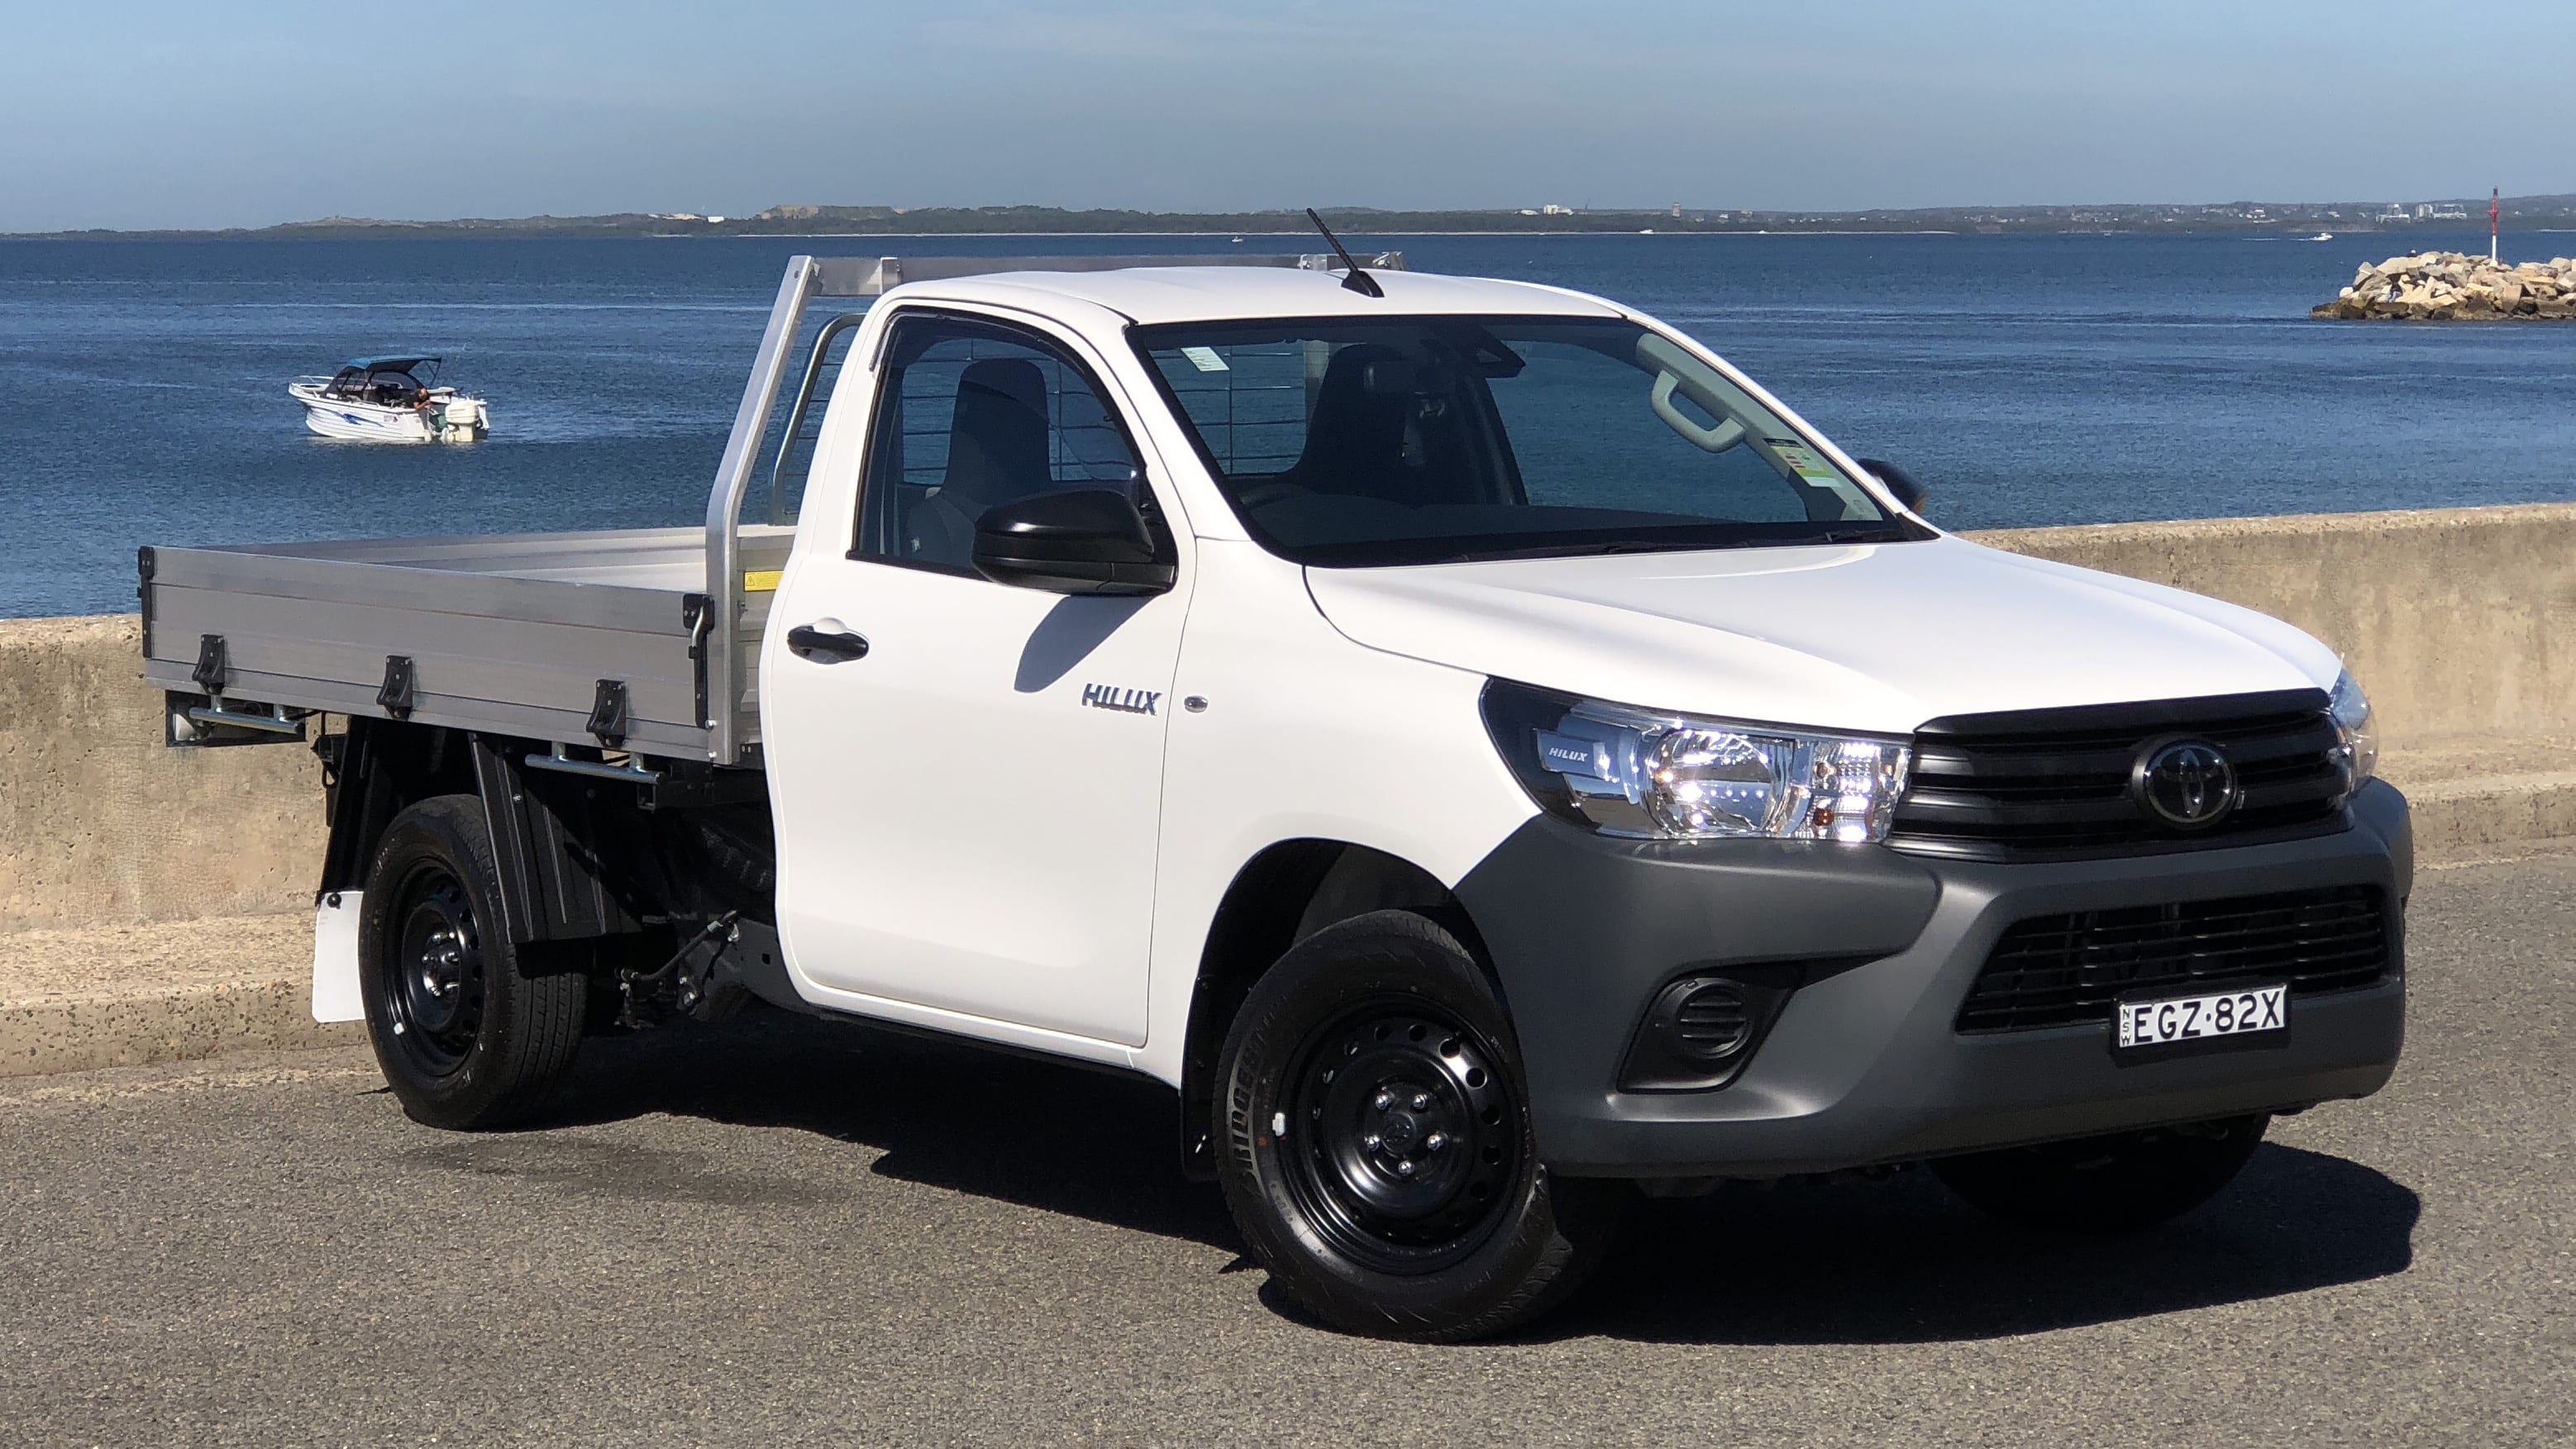 What Are the Different Models of Toyota Hilux & Which Is the Most Reliable?